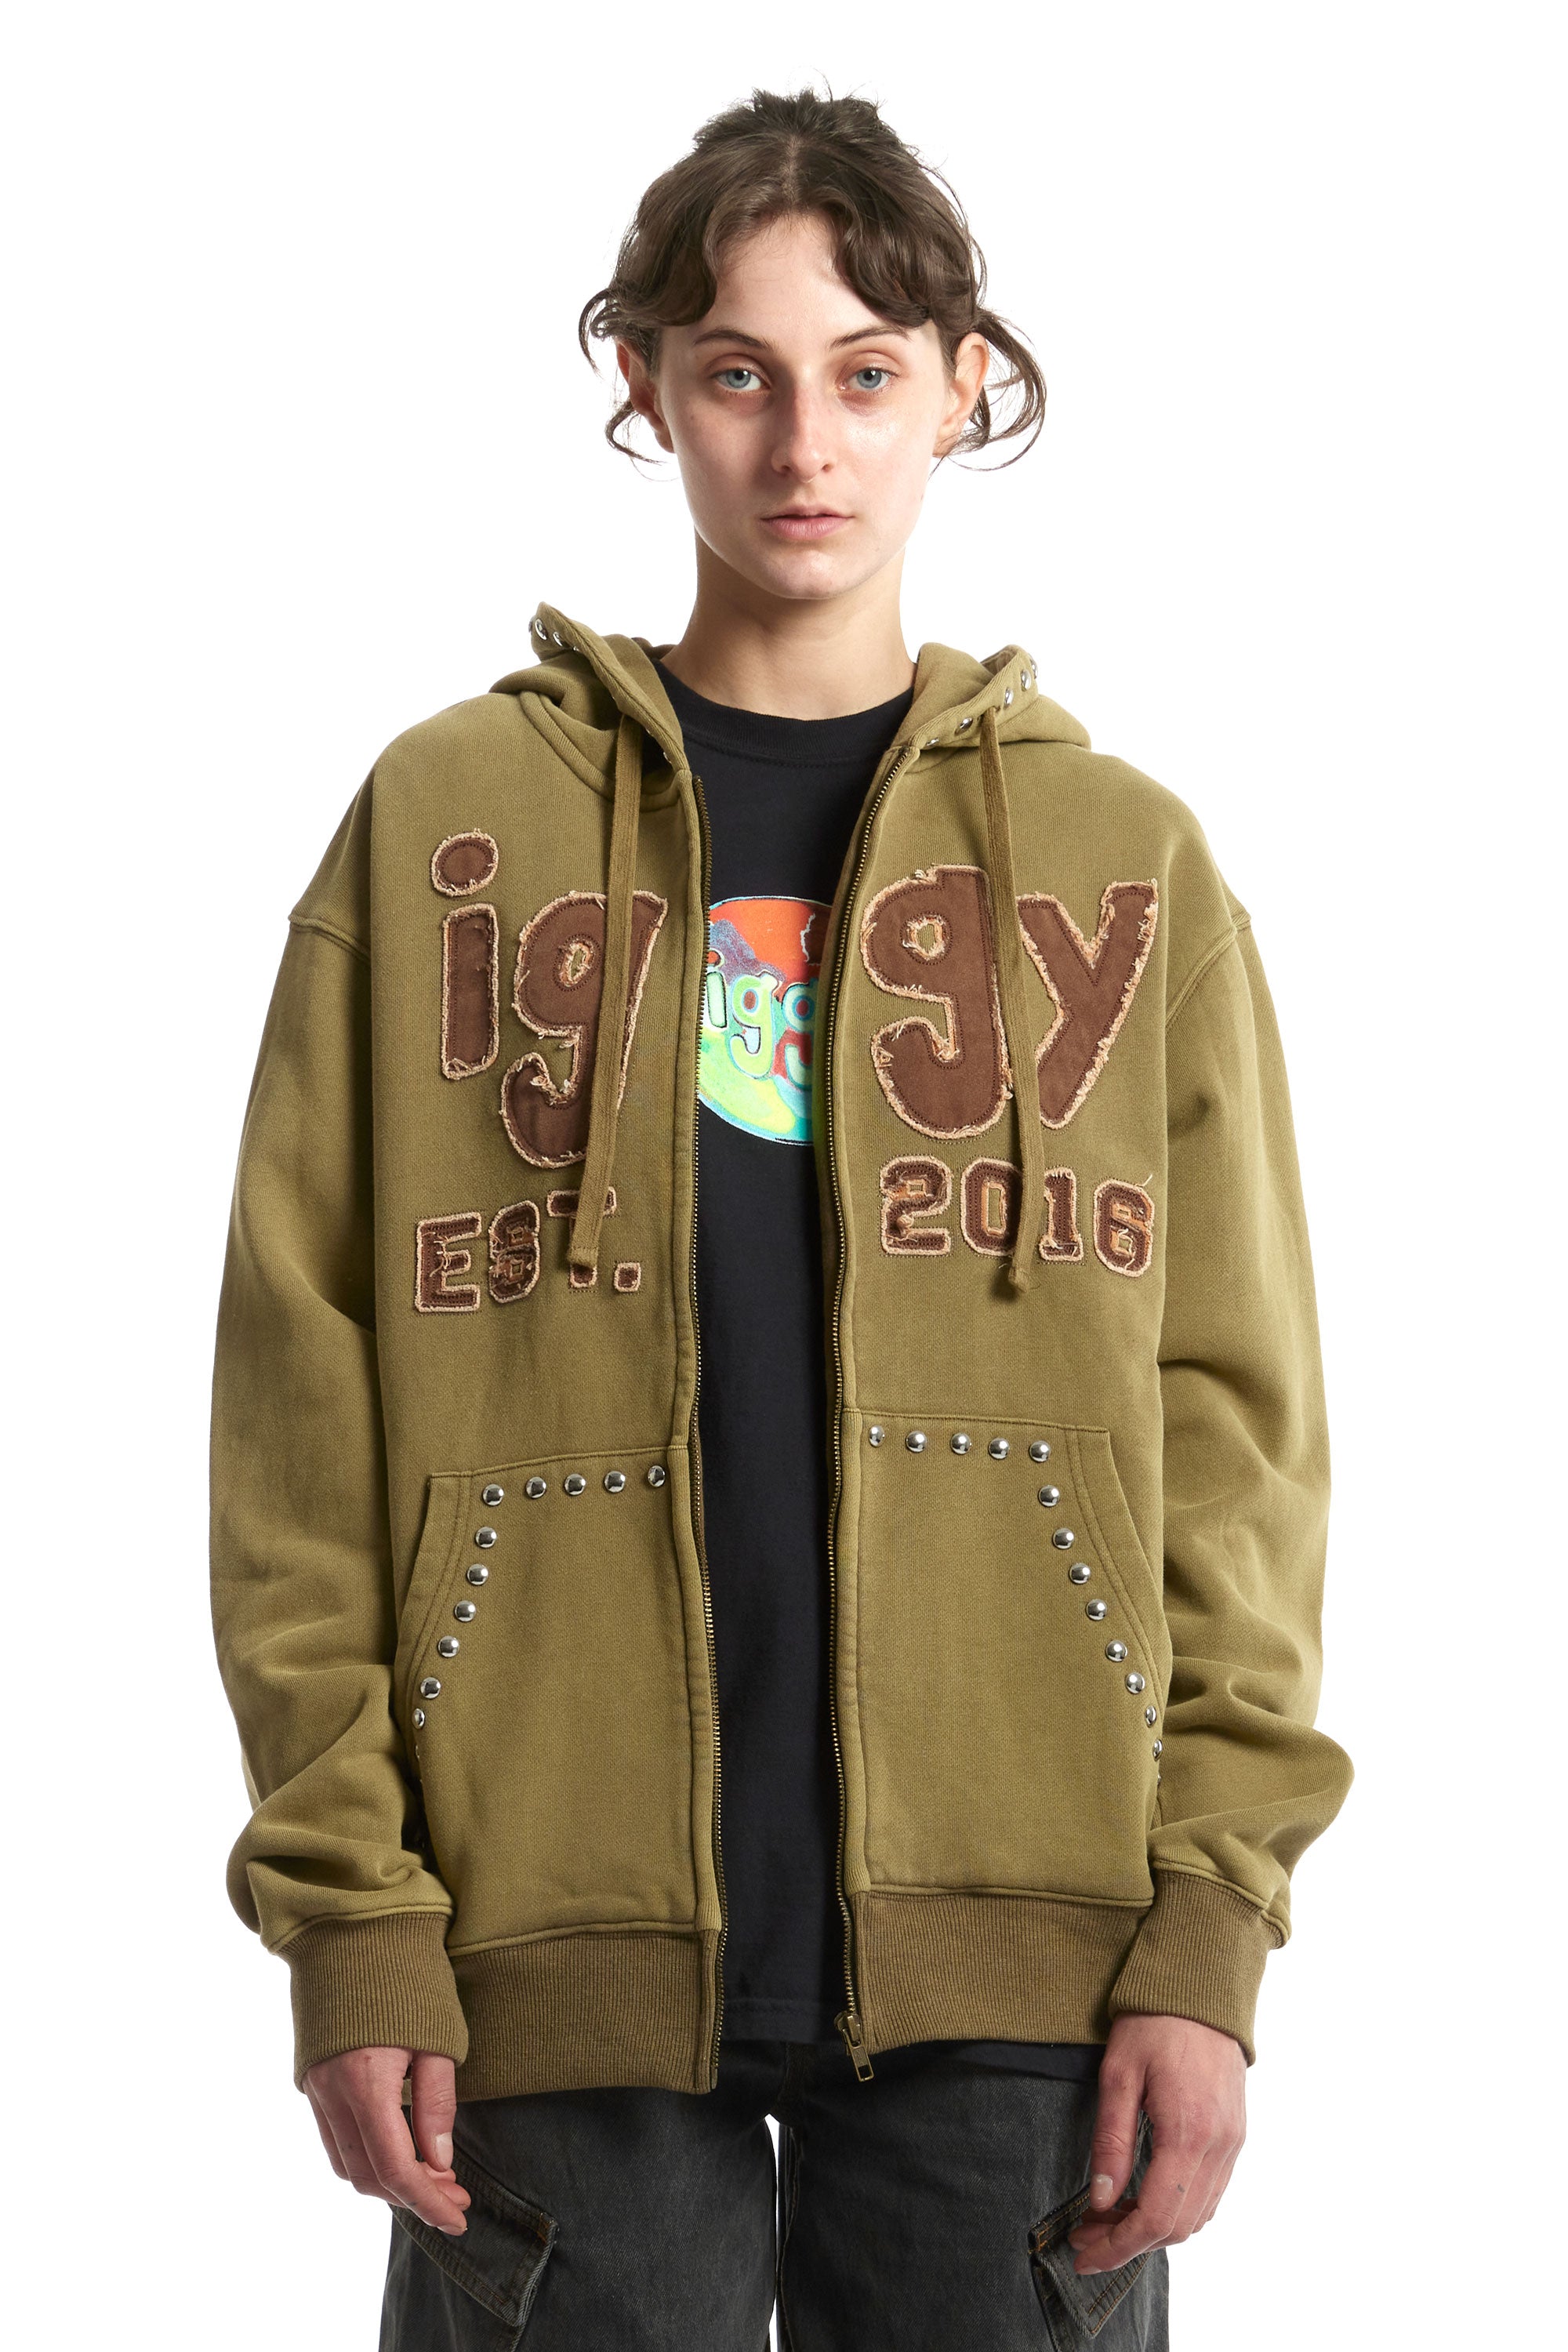 The IGGY - PATCHWORK ZIP UP SWEATSHIRT  available online with global shipping, and in PAM Stores Melbourne and Sydney.